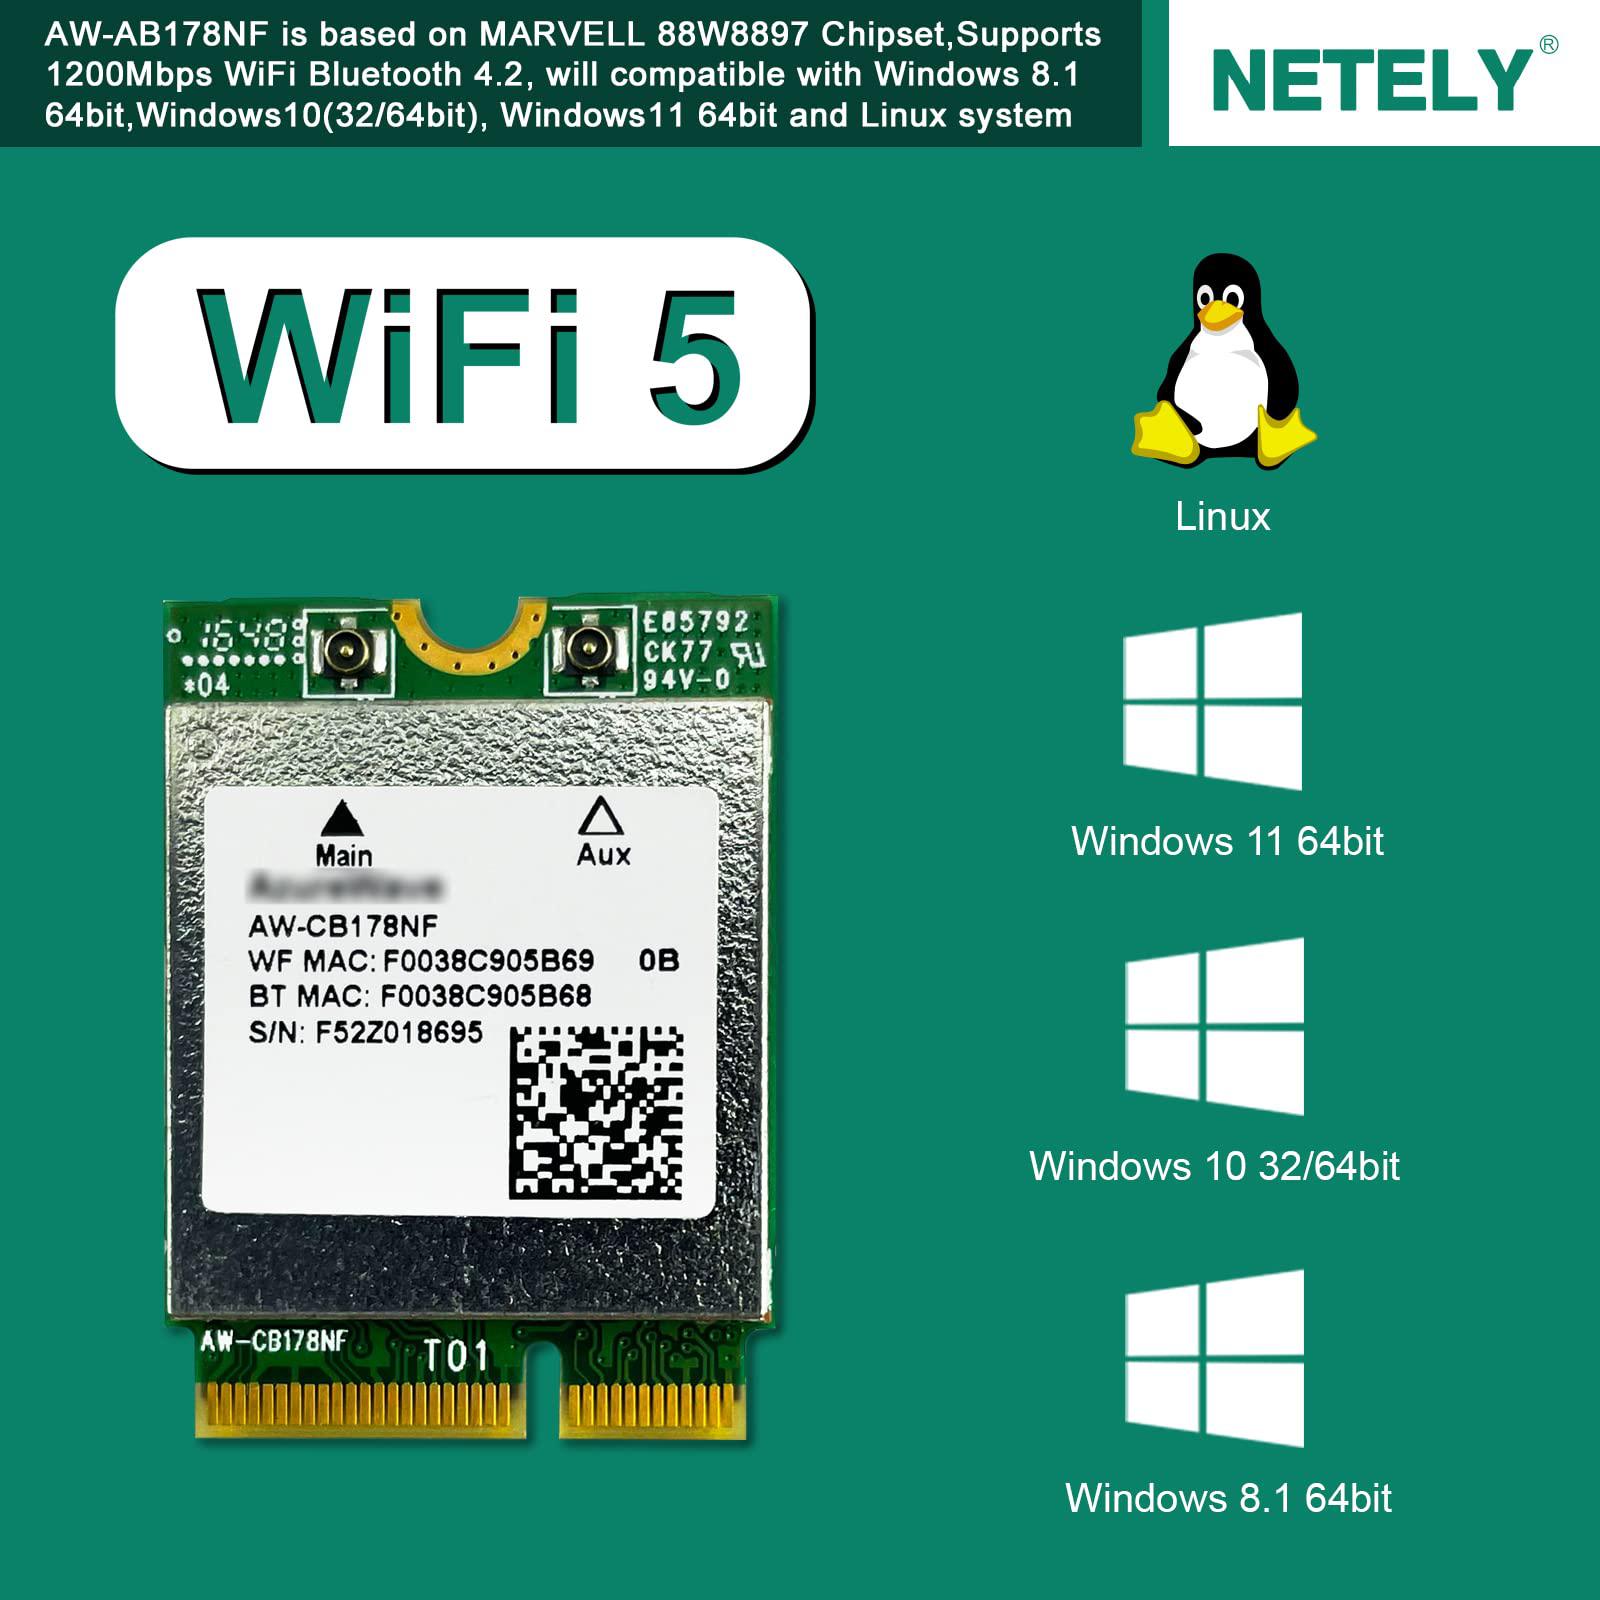 netely ieee 802.11ac wifi 5 ngff m2 interface 1200mbps wifi adapter for laptop -ngff m2 wi-fi card with wifi audio adapter (a